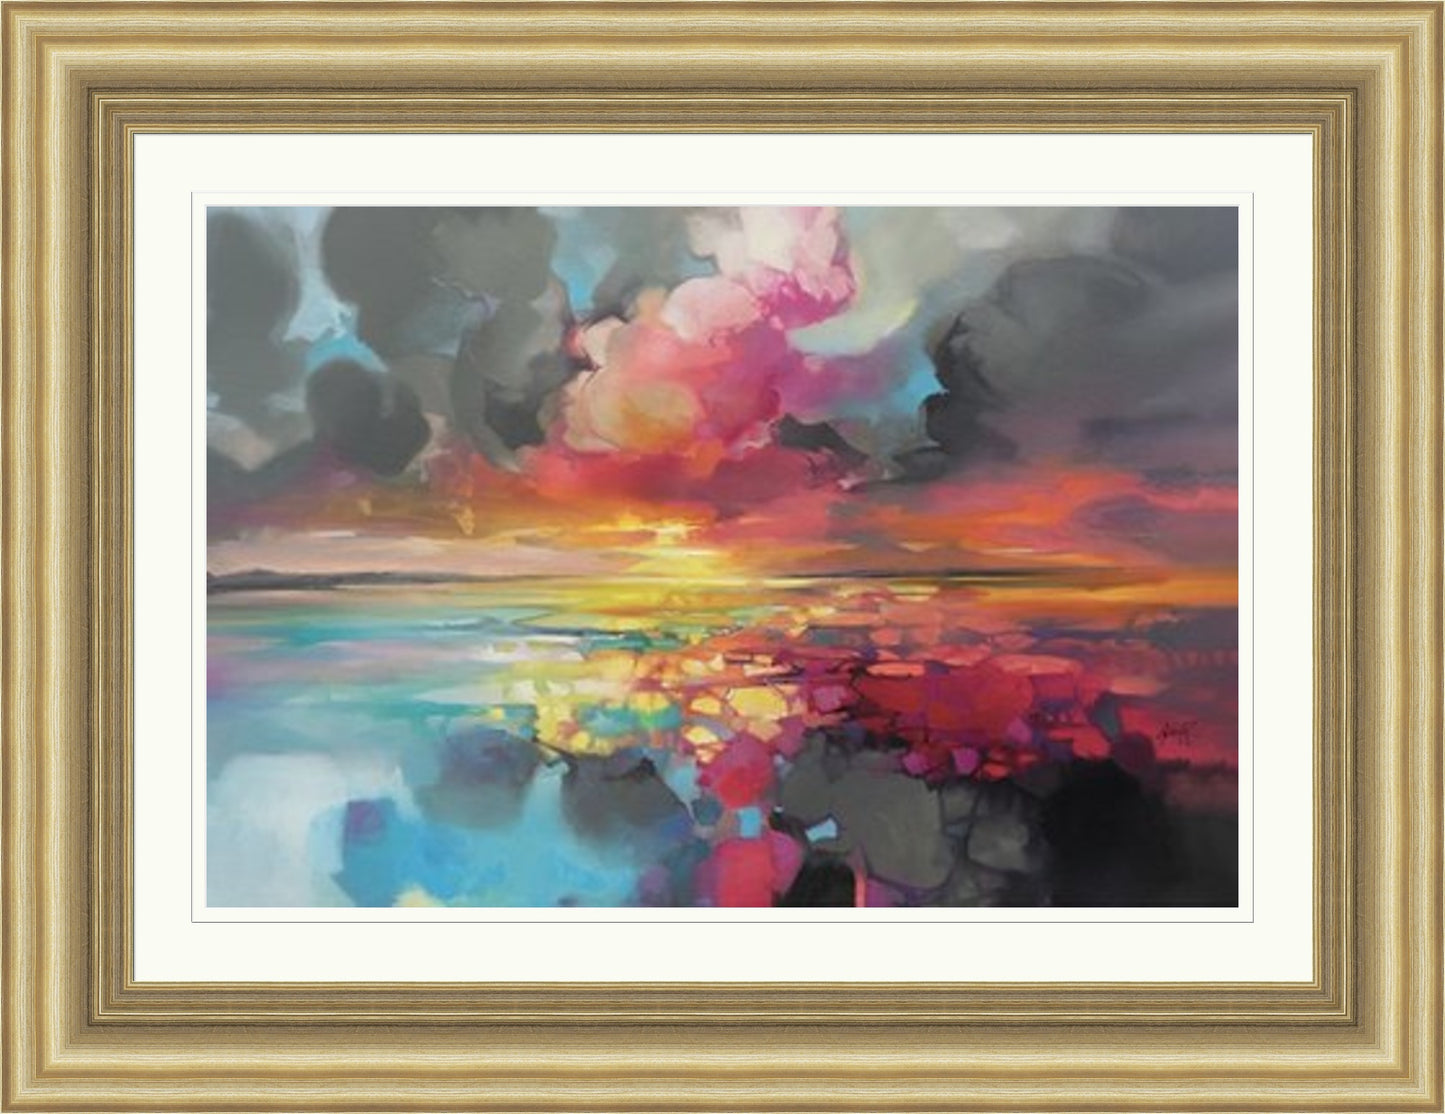 Order and Chaos by Scott Naismith